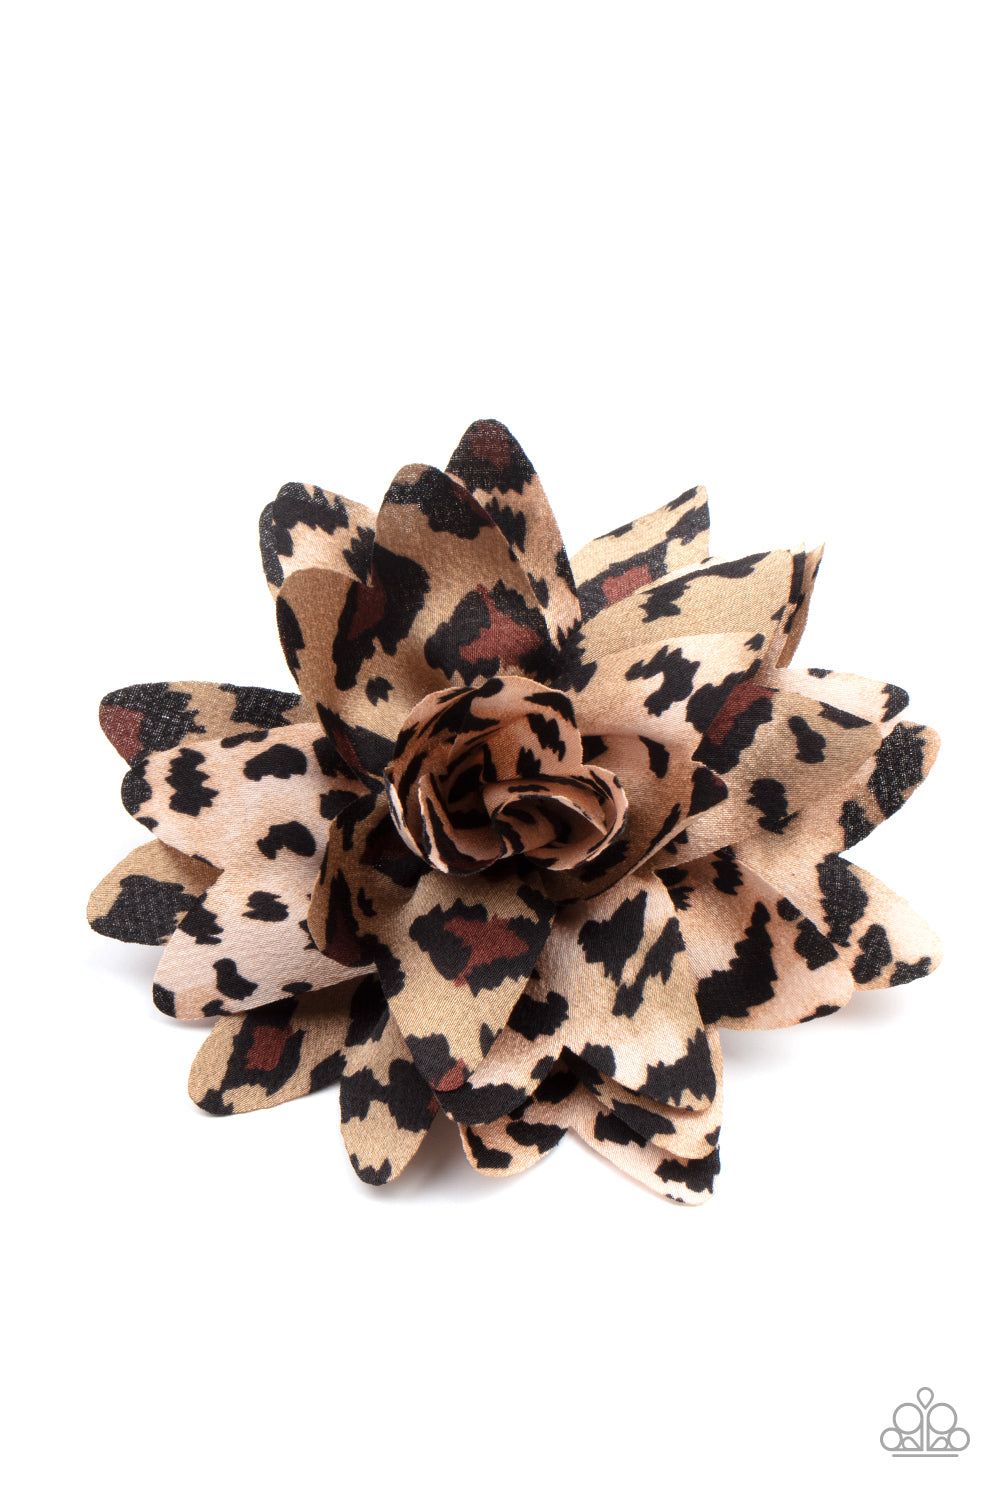 Featuring animal inspired patterns, mismatched petals gather into a wildly wonderful blossom. Features a standard hair clip on the back.